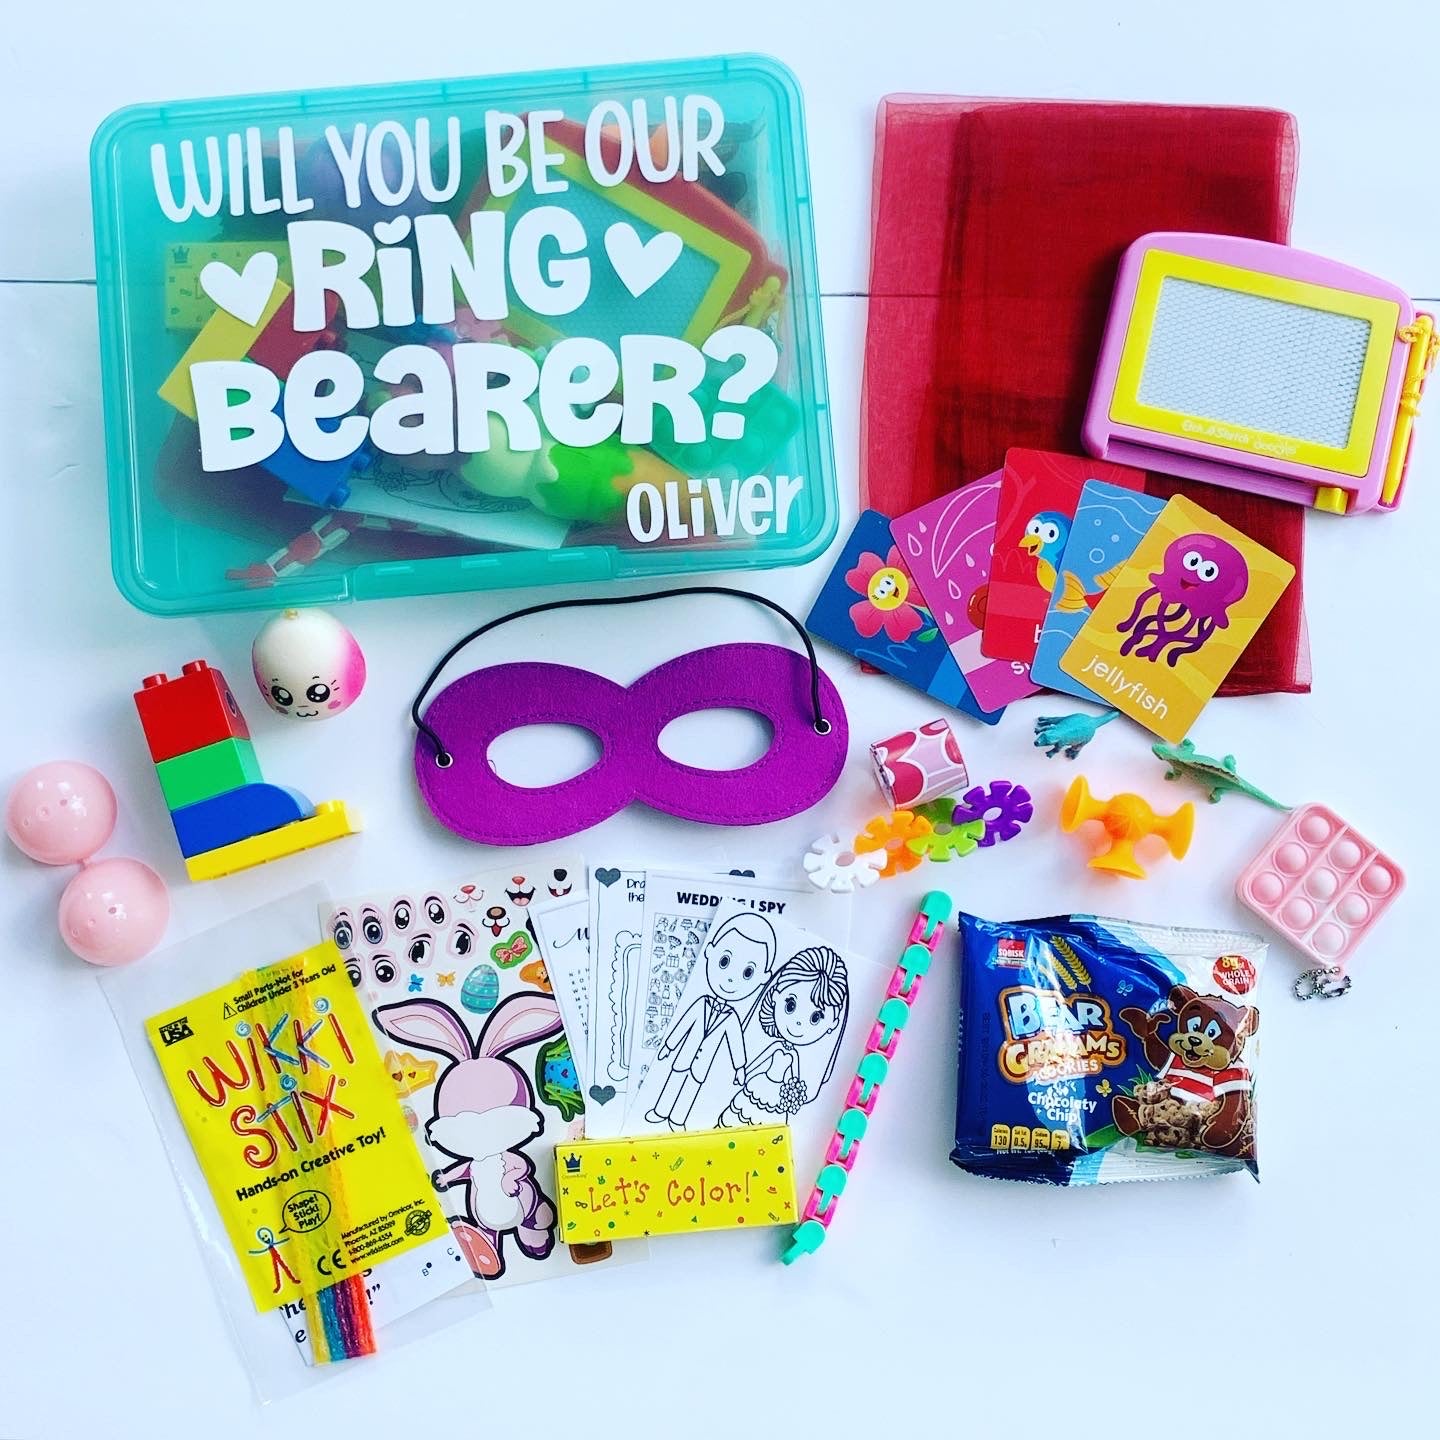 turquoise wedding busy box with will you be our ring bearer wording, name Oliver and two hearts. Activities surround box including peekaboo scarf, magna doodle, flashcards, slap bracelet, pop it keychain, teddy graham snacks, wedding coloring pages, crayons, wiki six, legos, squishy, dinosaurs, mask, fidgets